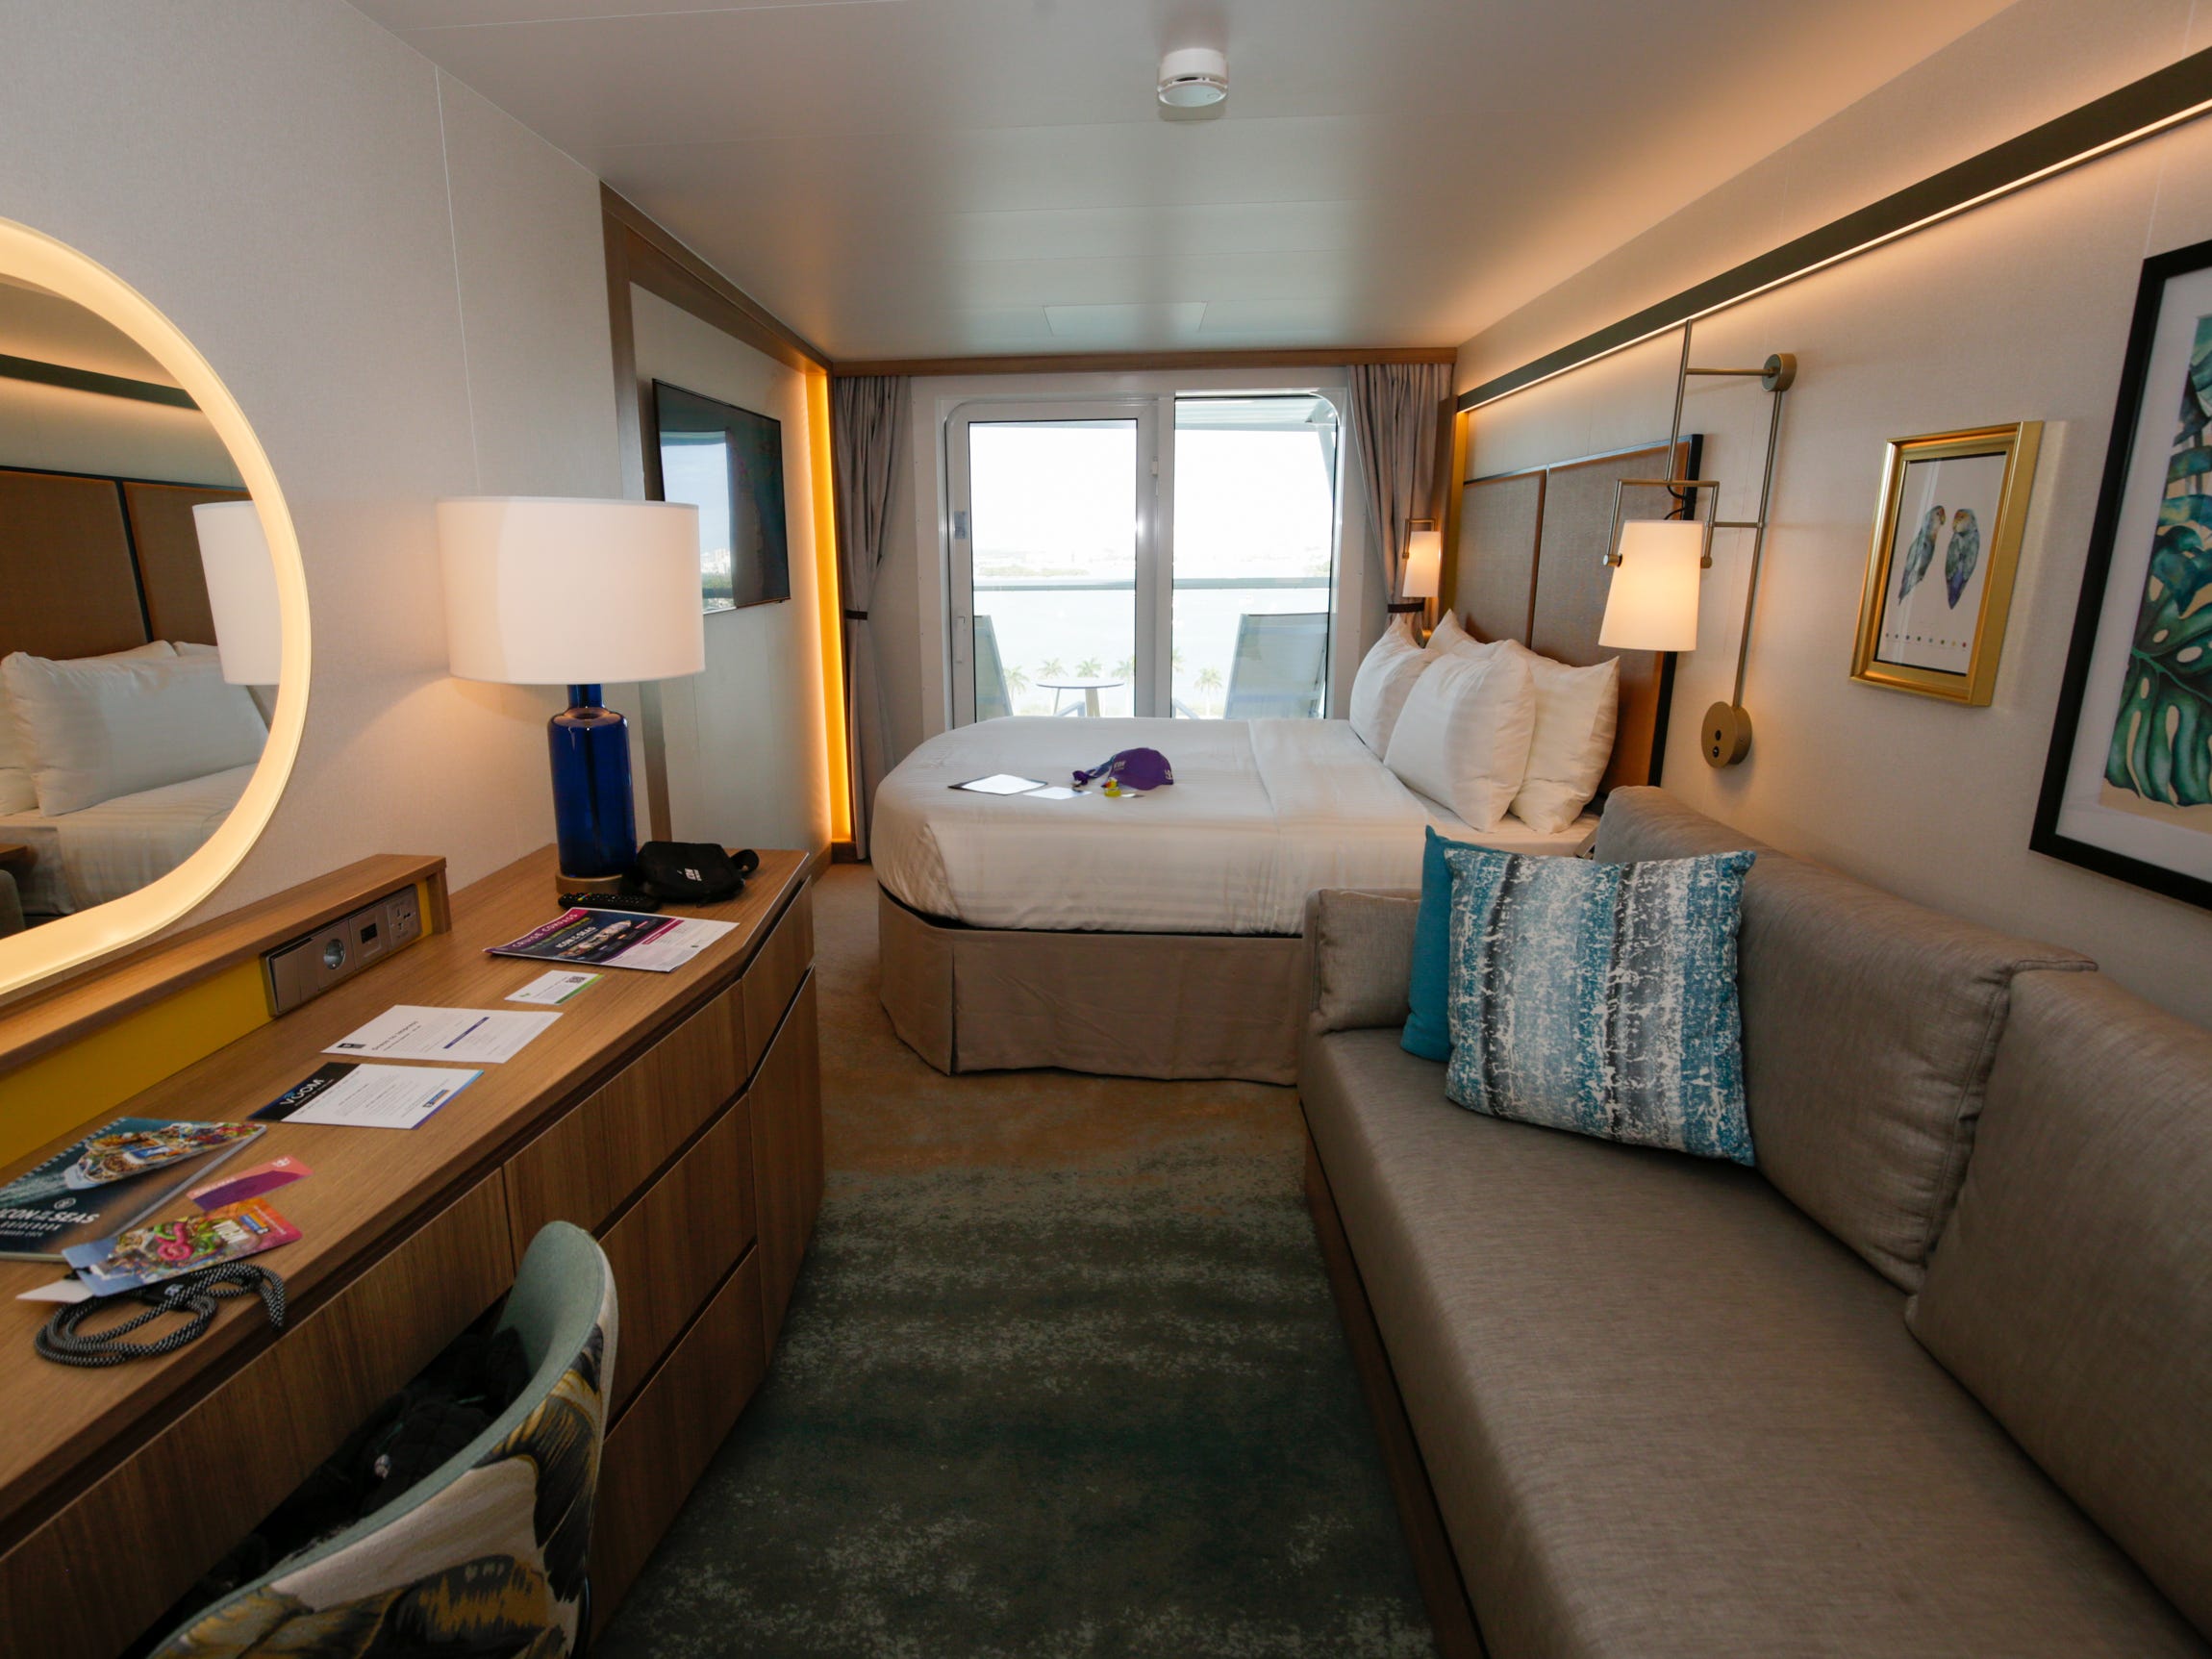 <p>A whopping 80% of its 2,805 cabins were designed for families.</p><p>Do we think a family of four could peacefully coexist in this 204-square-foot stateroom with a bathroom so small, my elbows were at war with the walls?</p>